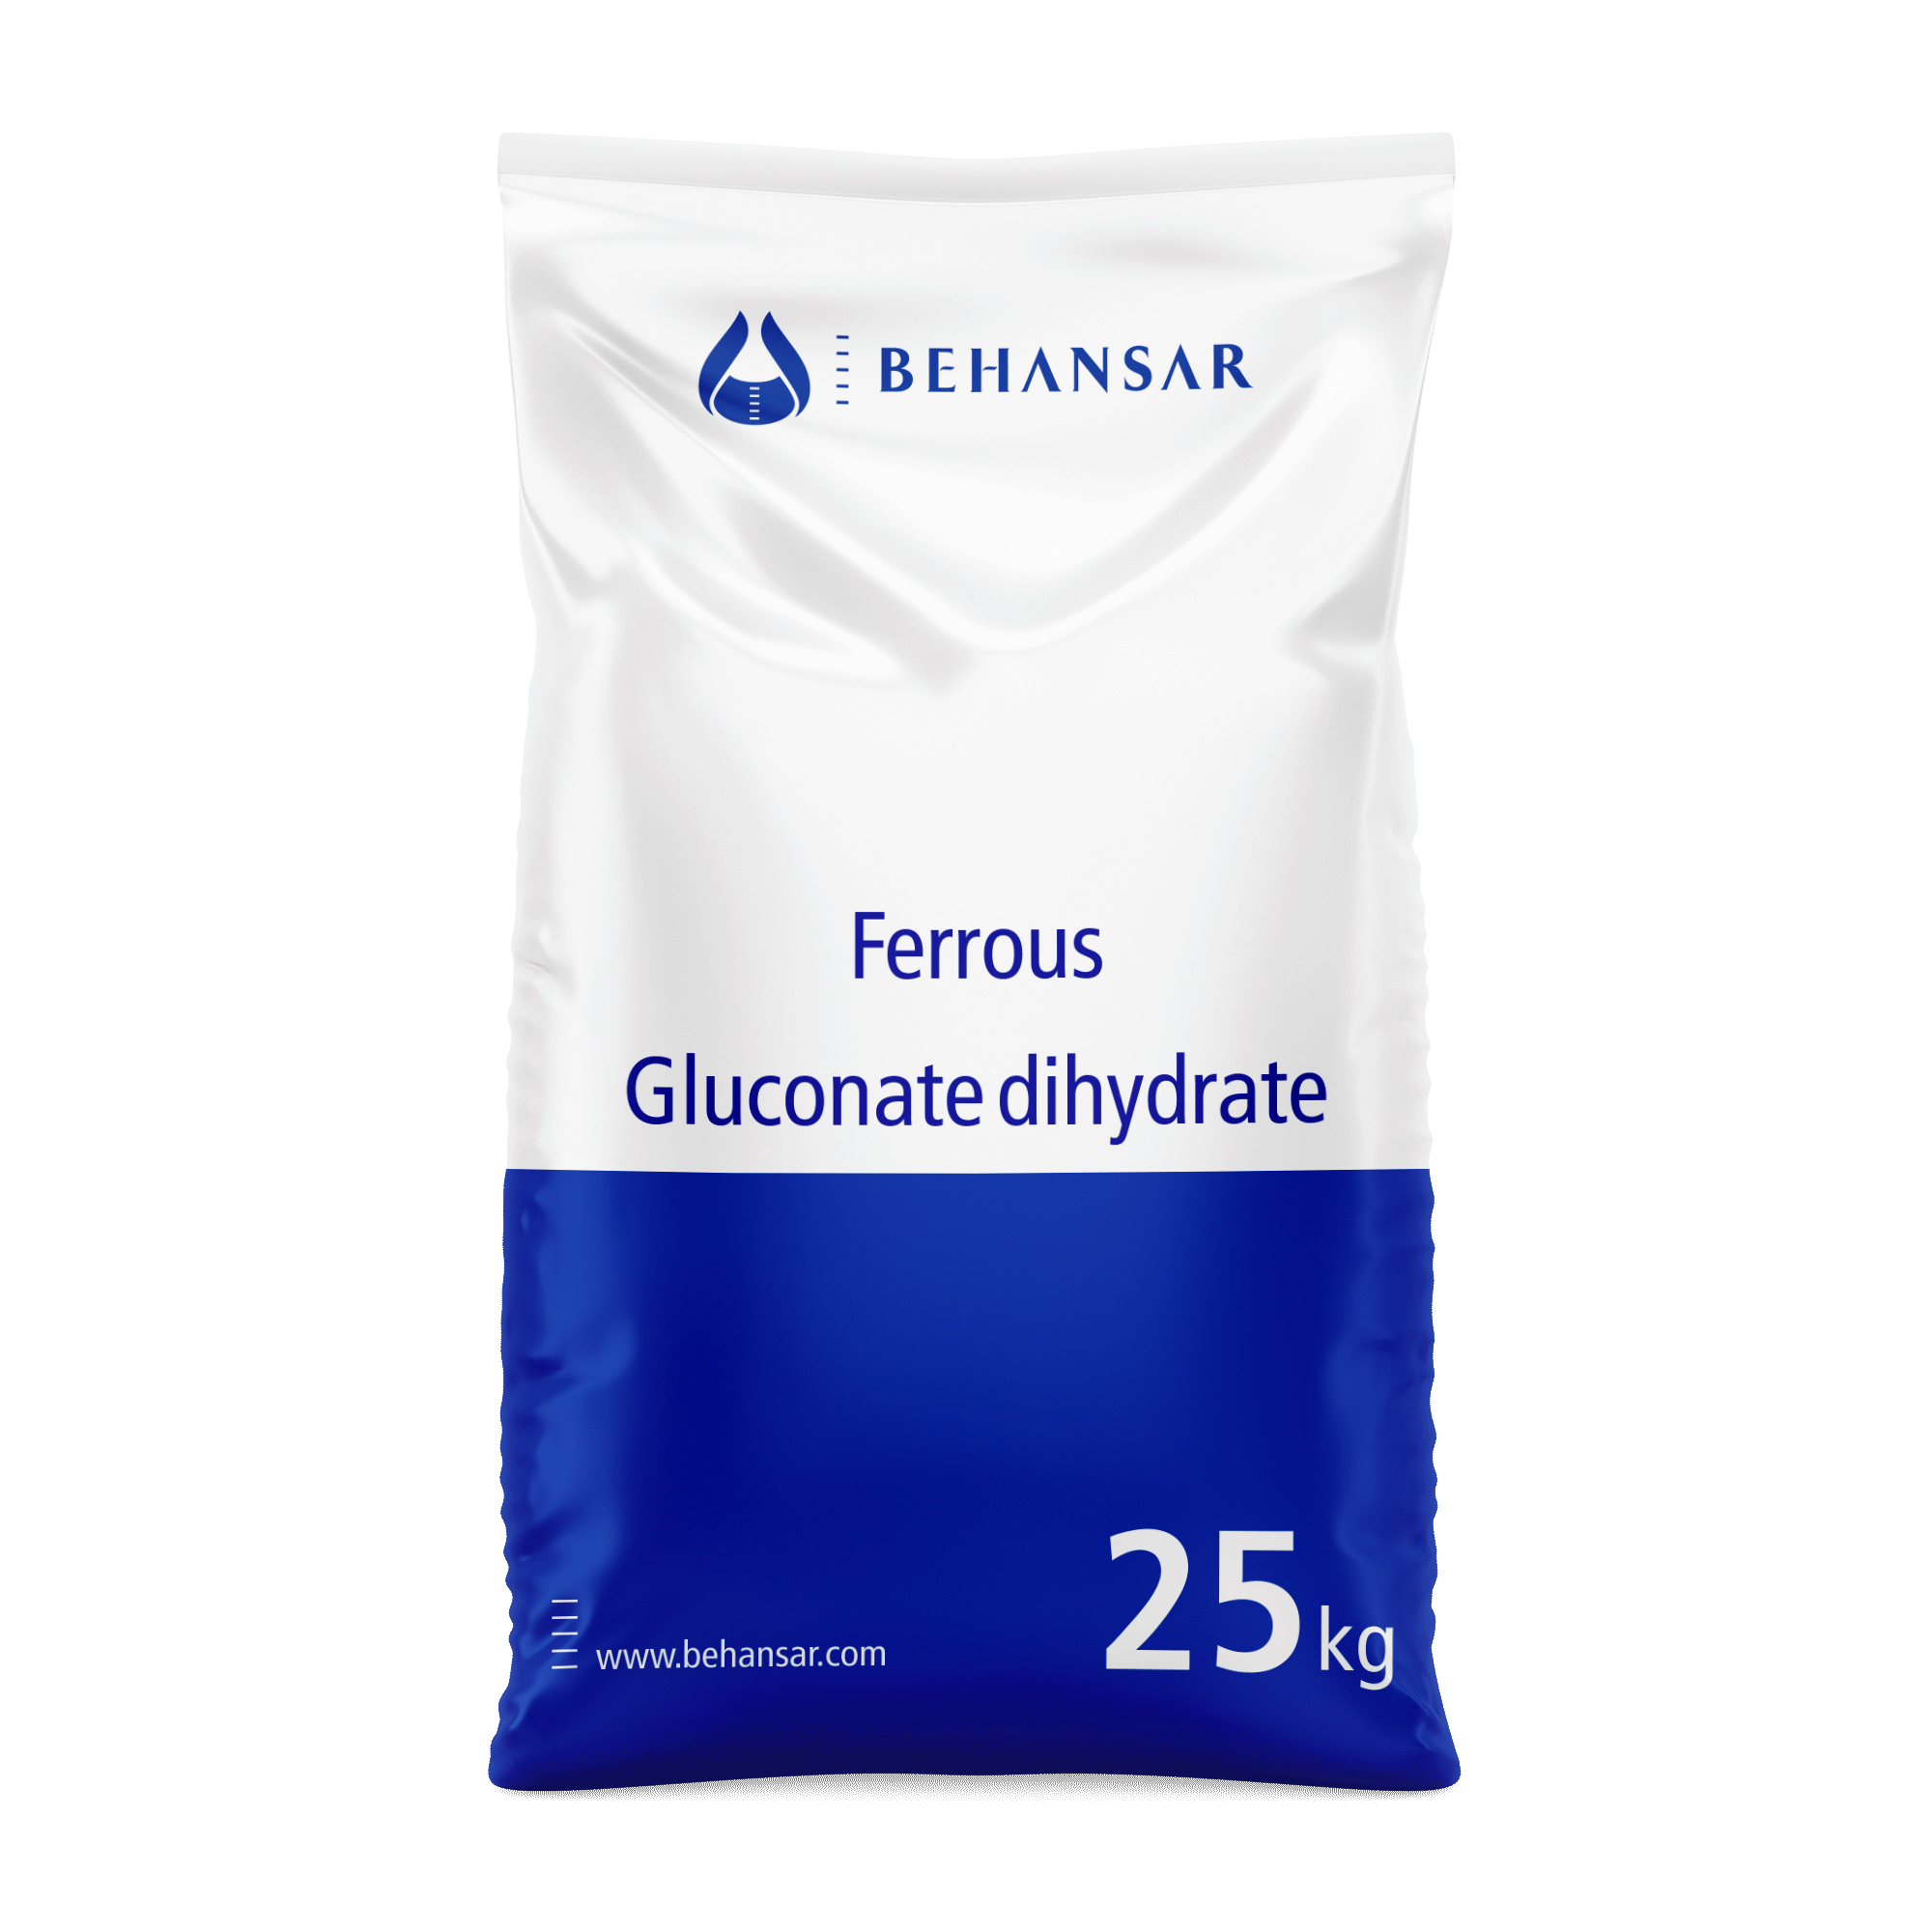 Ferrous Gluconate dihydrate is one of the products of Behansar Co